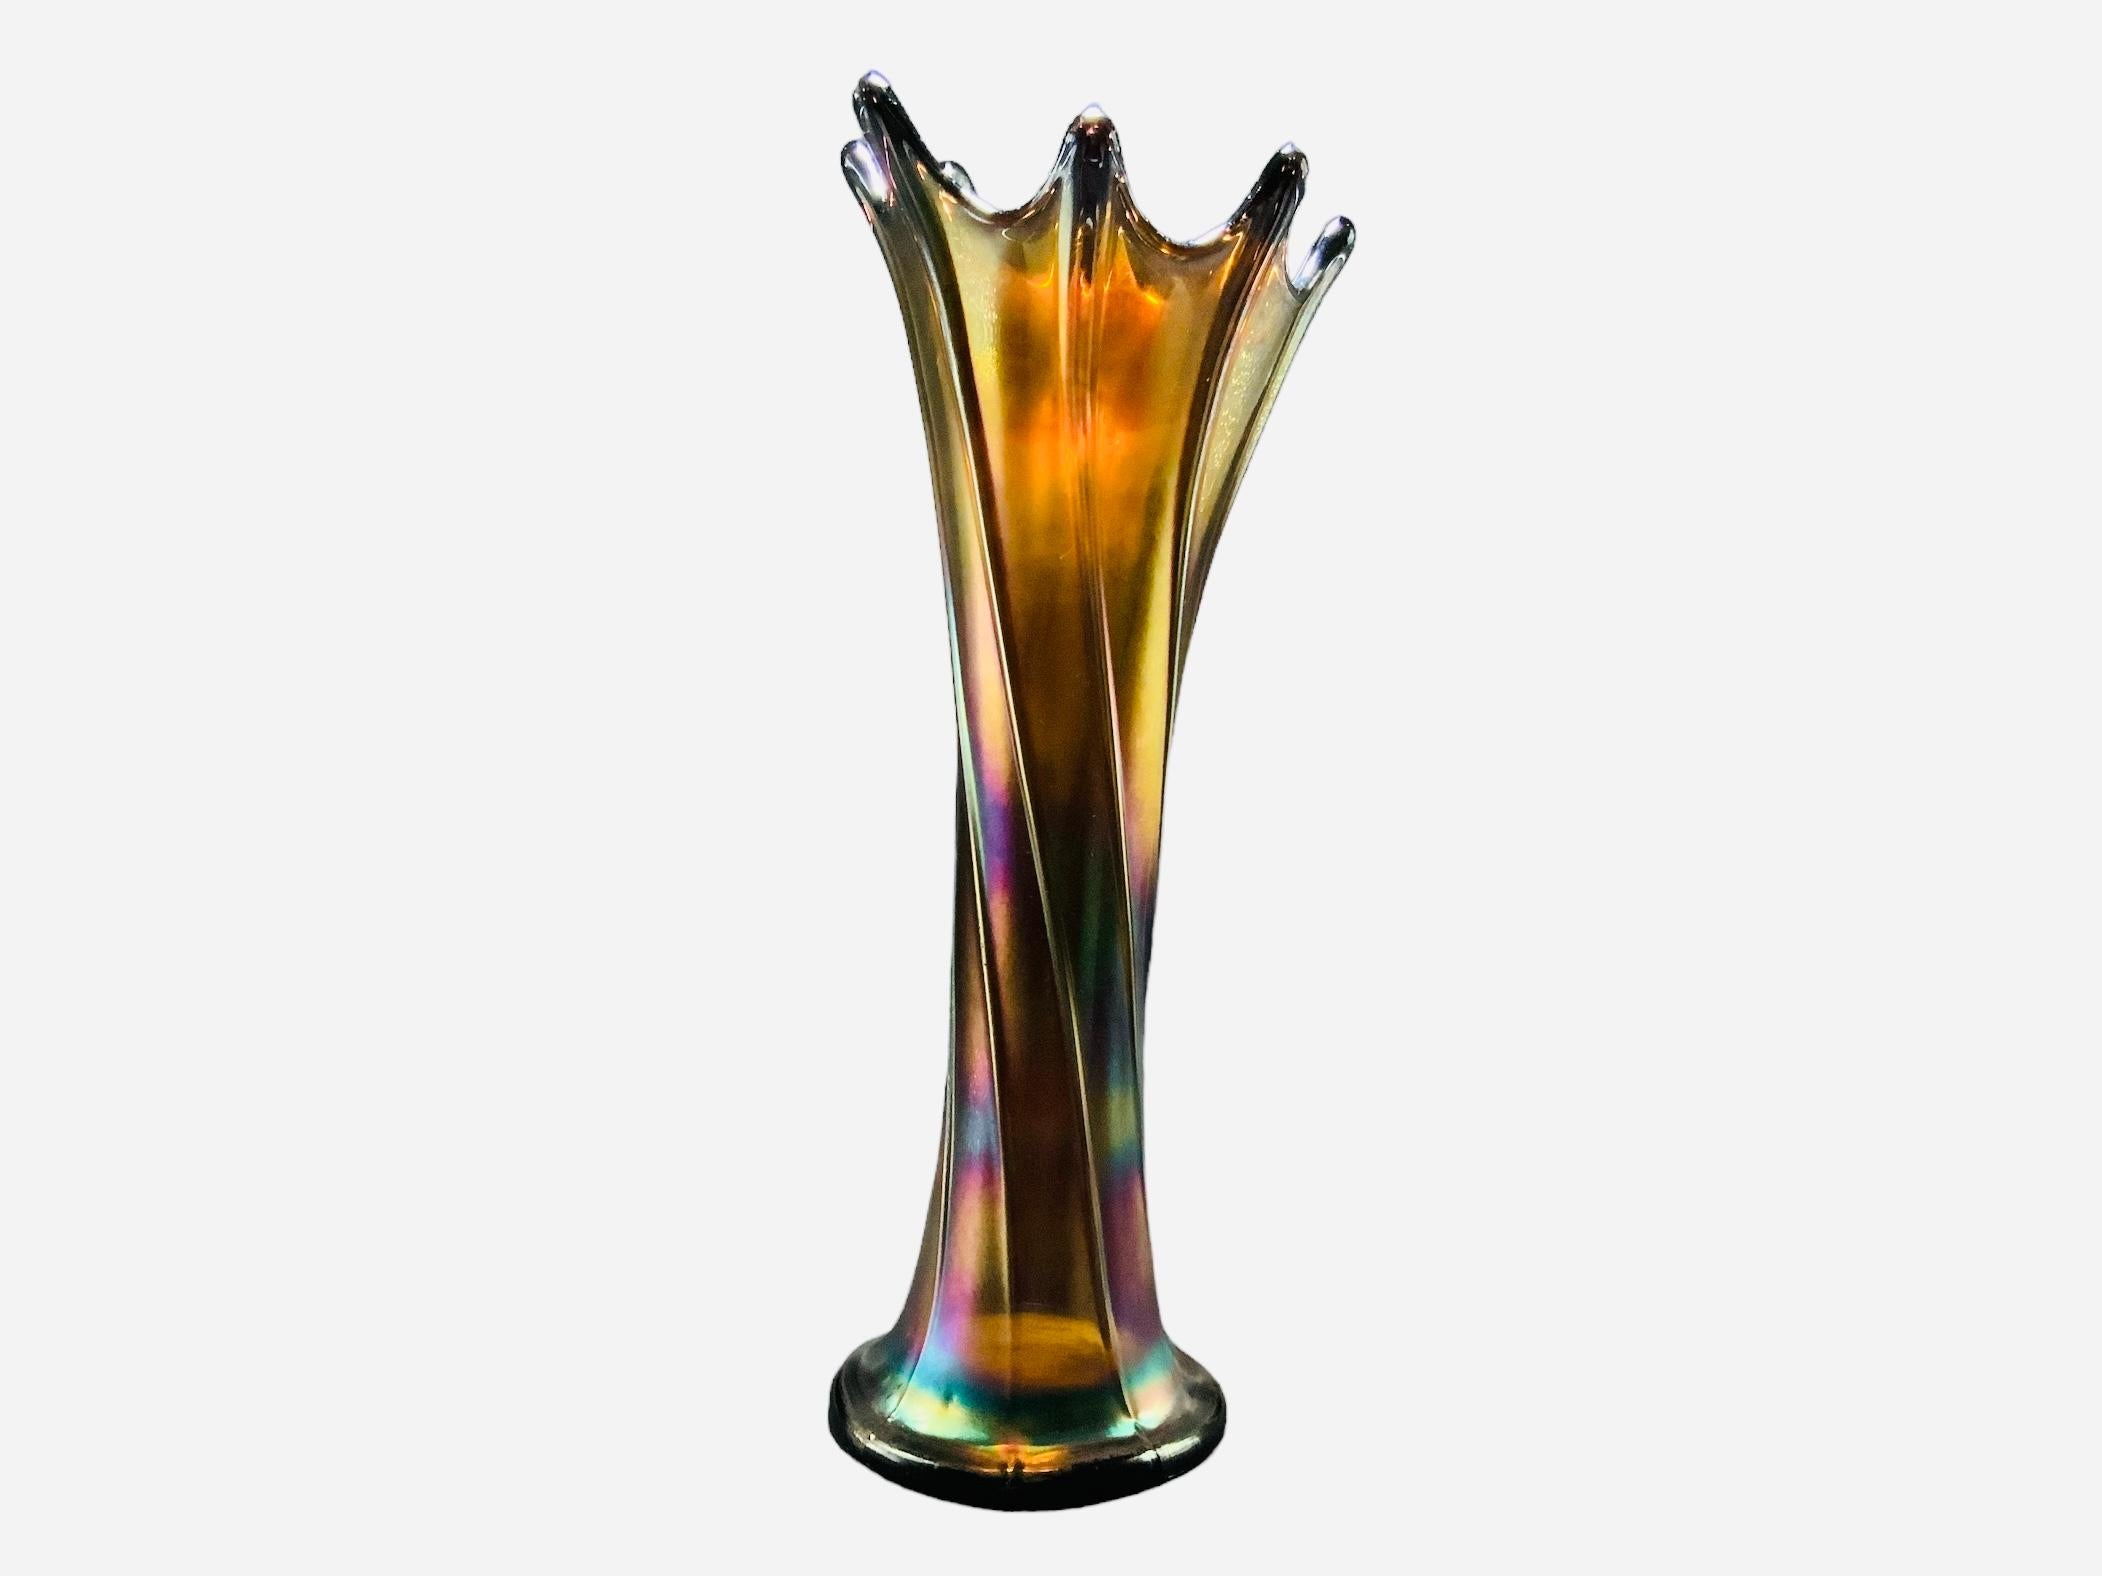 Large Iridescent Glass Flower Vase In Good Condition For Sale In Guaynabo, PR